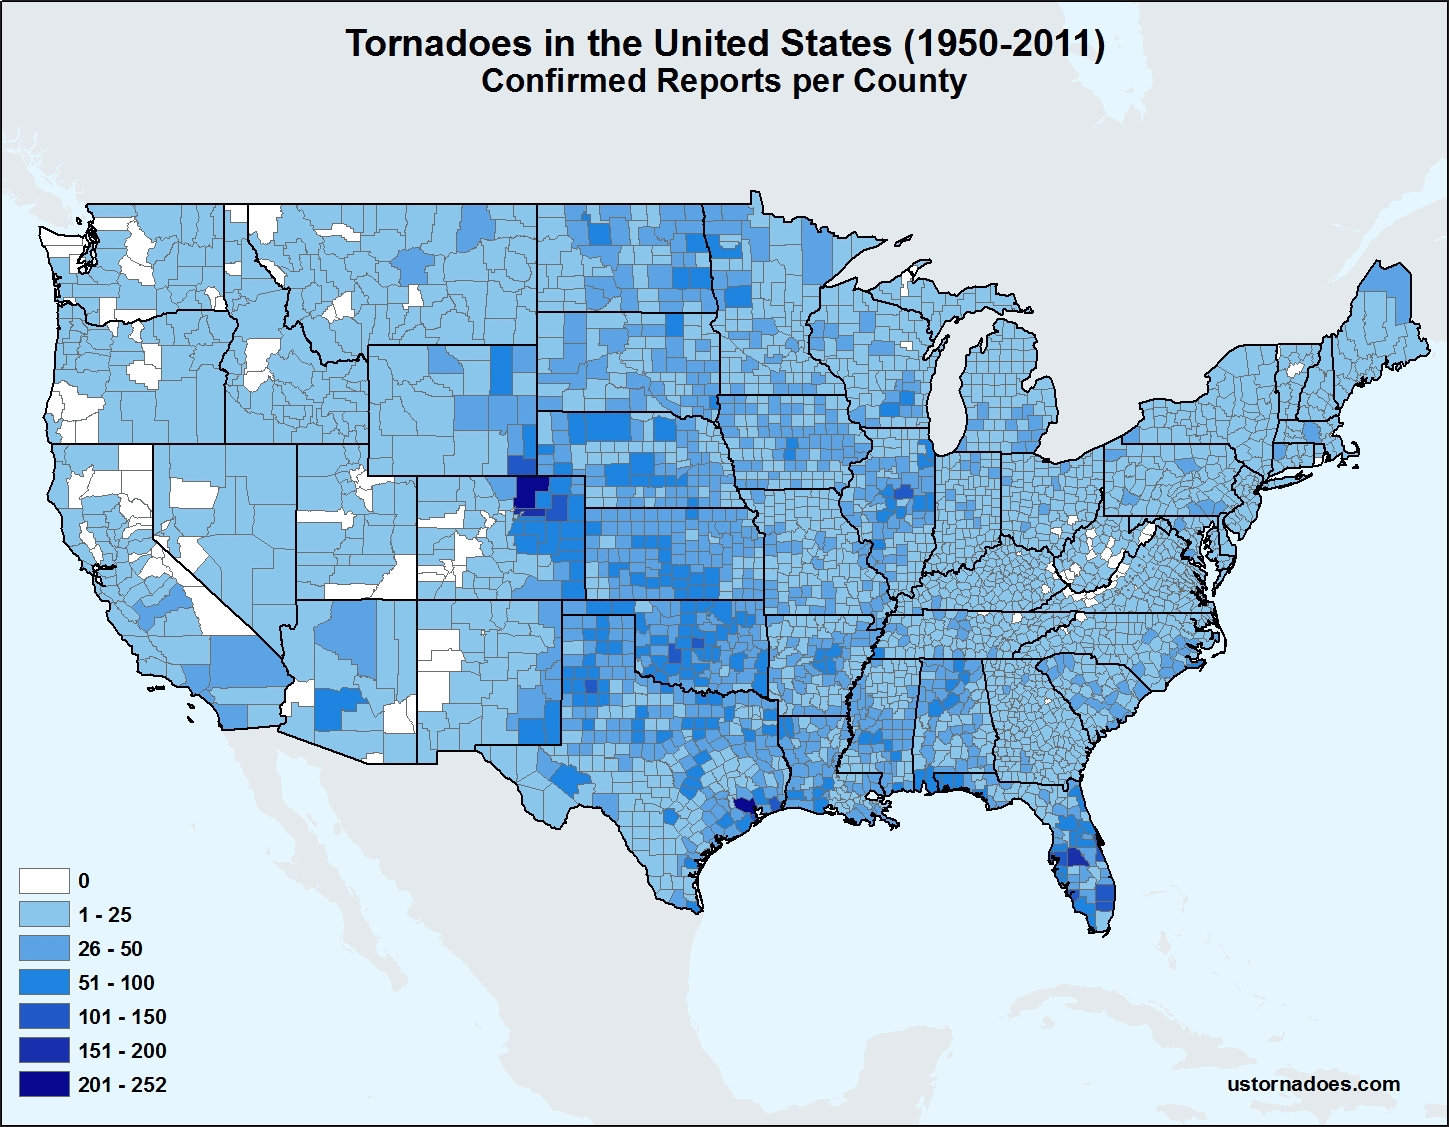 Map: U.S. Tornadoes by County, 1950-2011